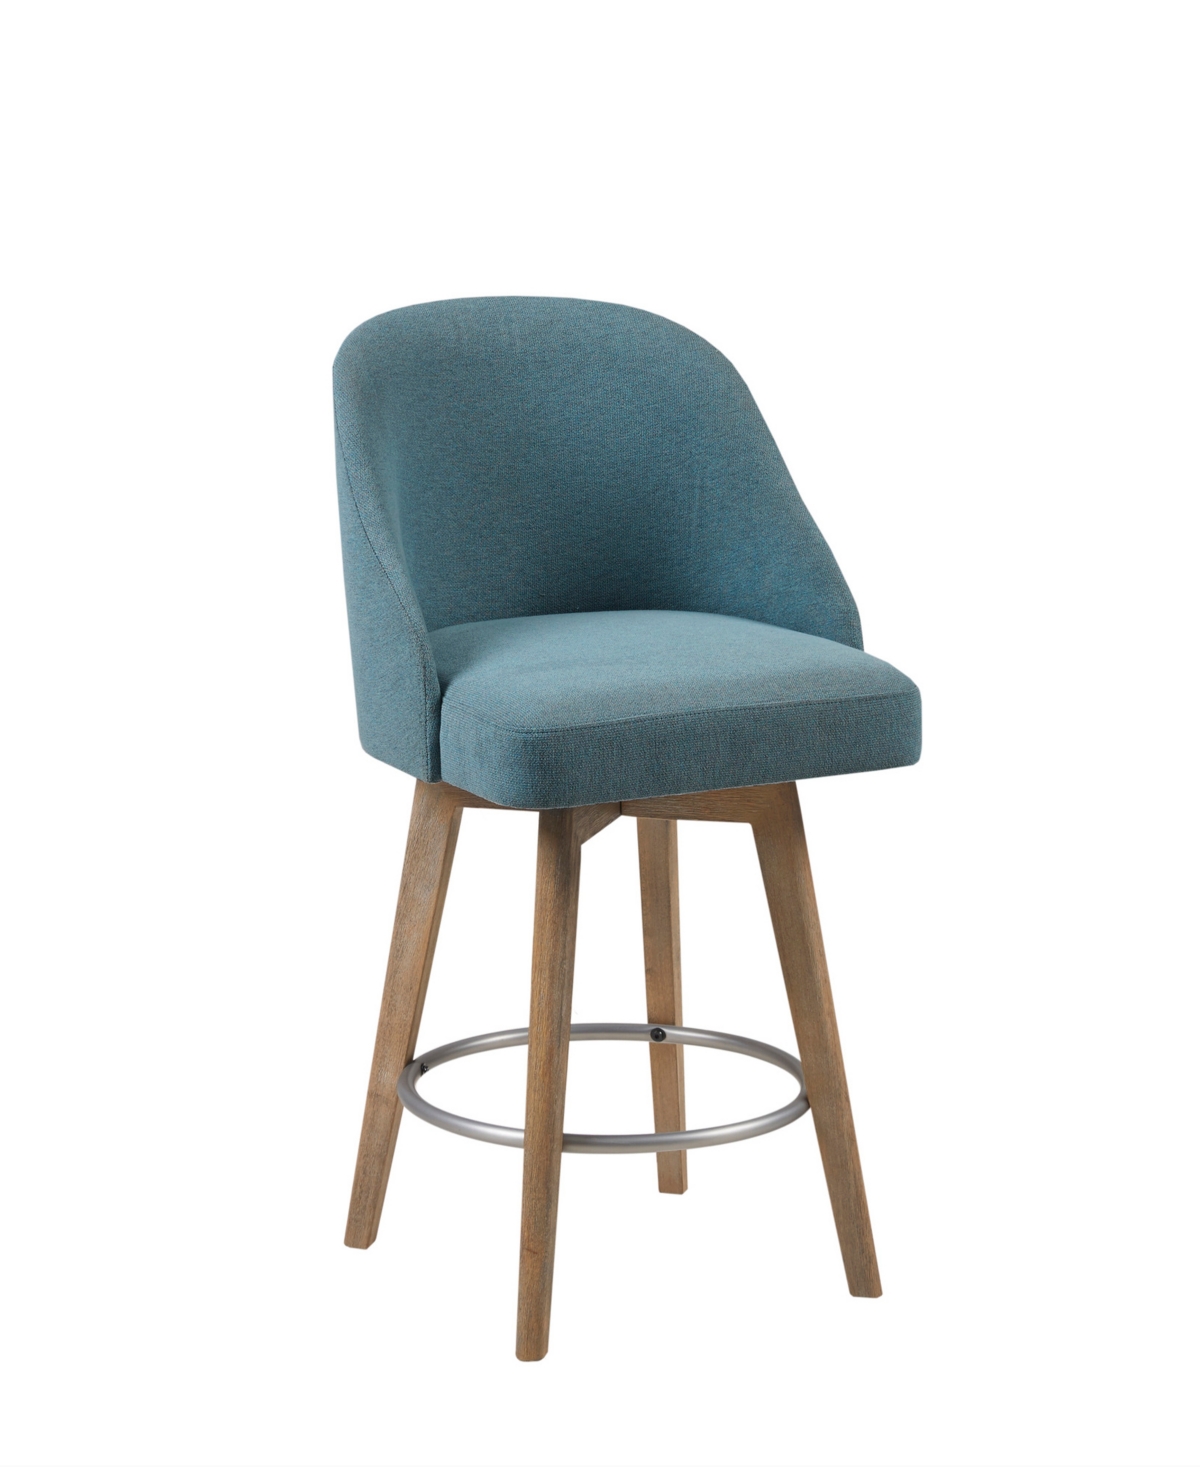 Madison Park Pearce 25.75" Wood Legs Swivel Seat Counter Stool In Blue